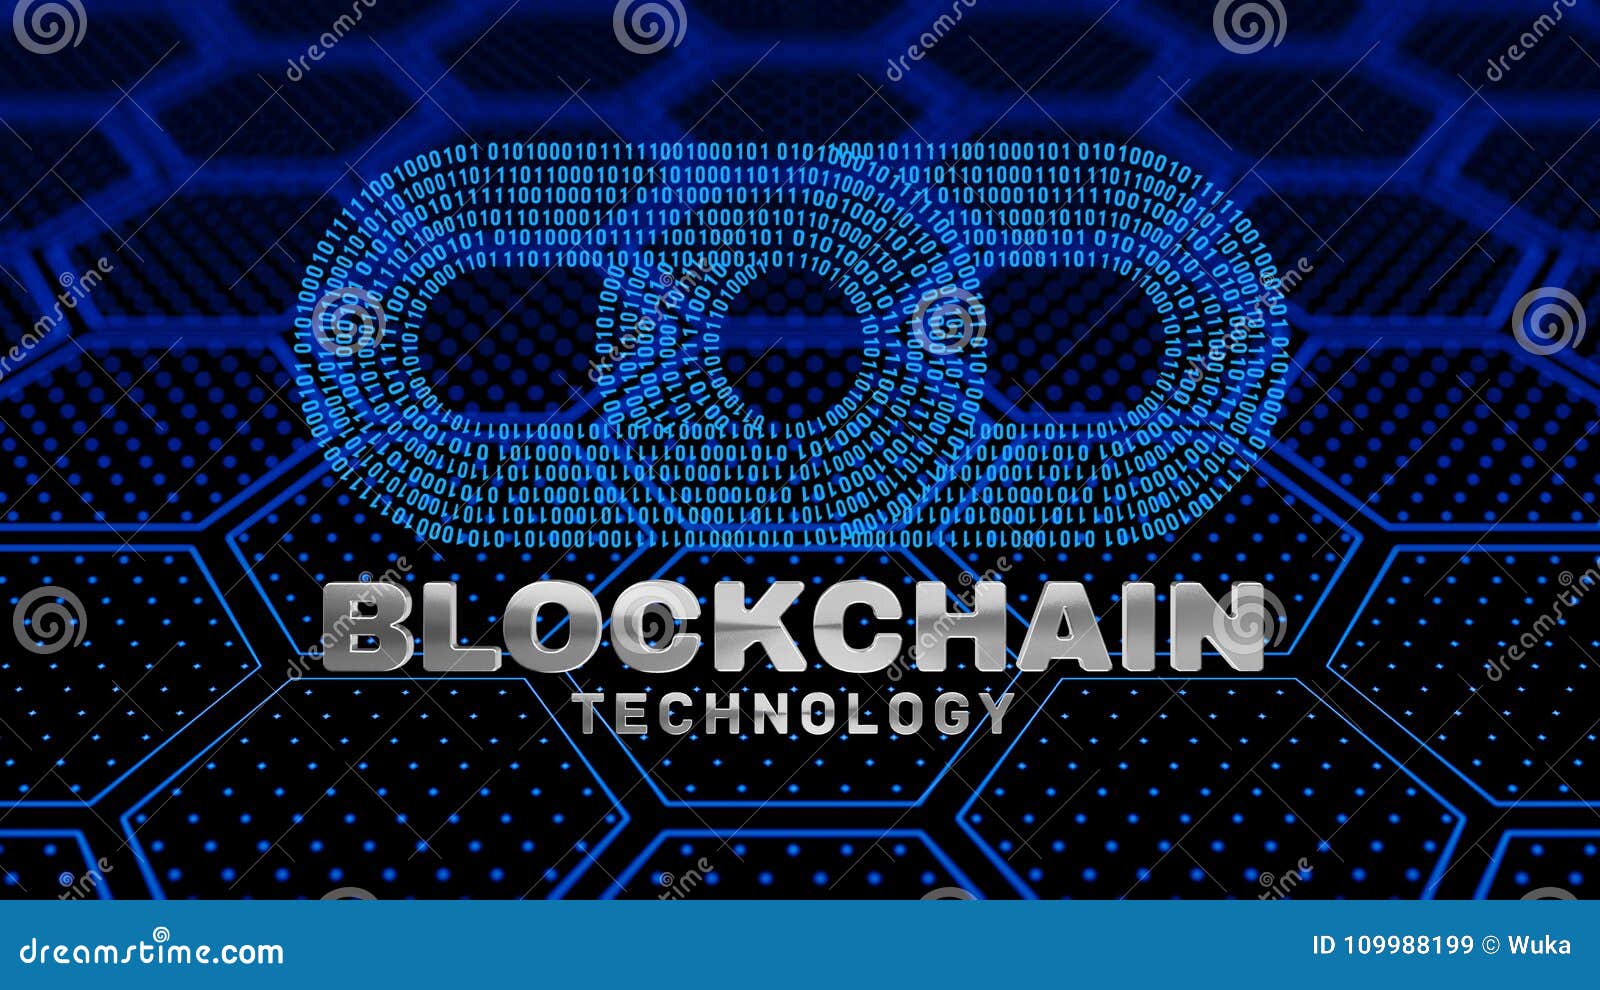 blogs on block chain and crypto-currency